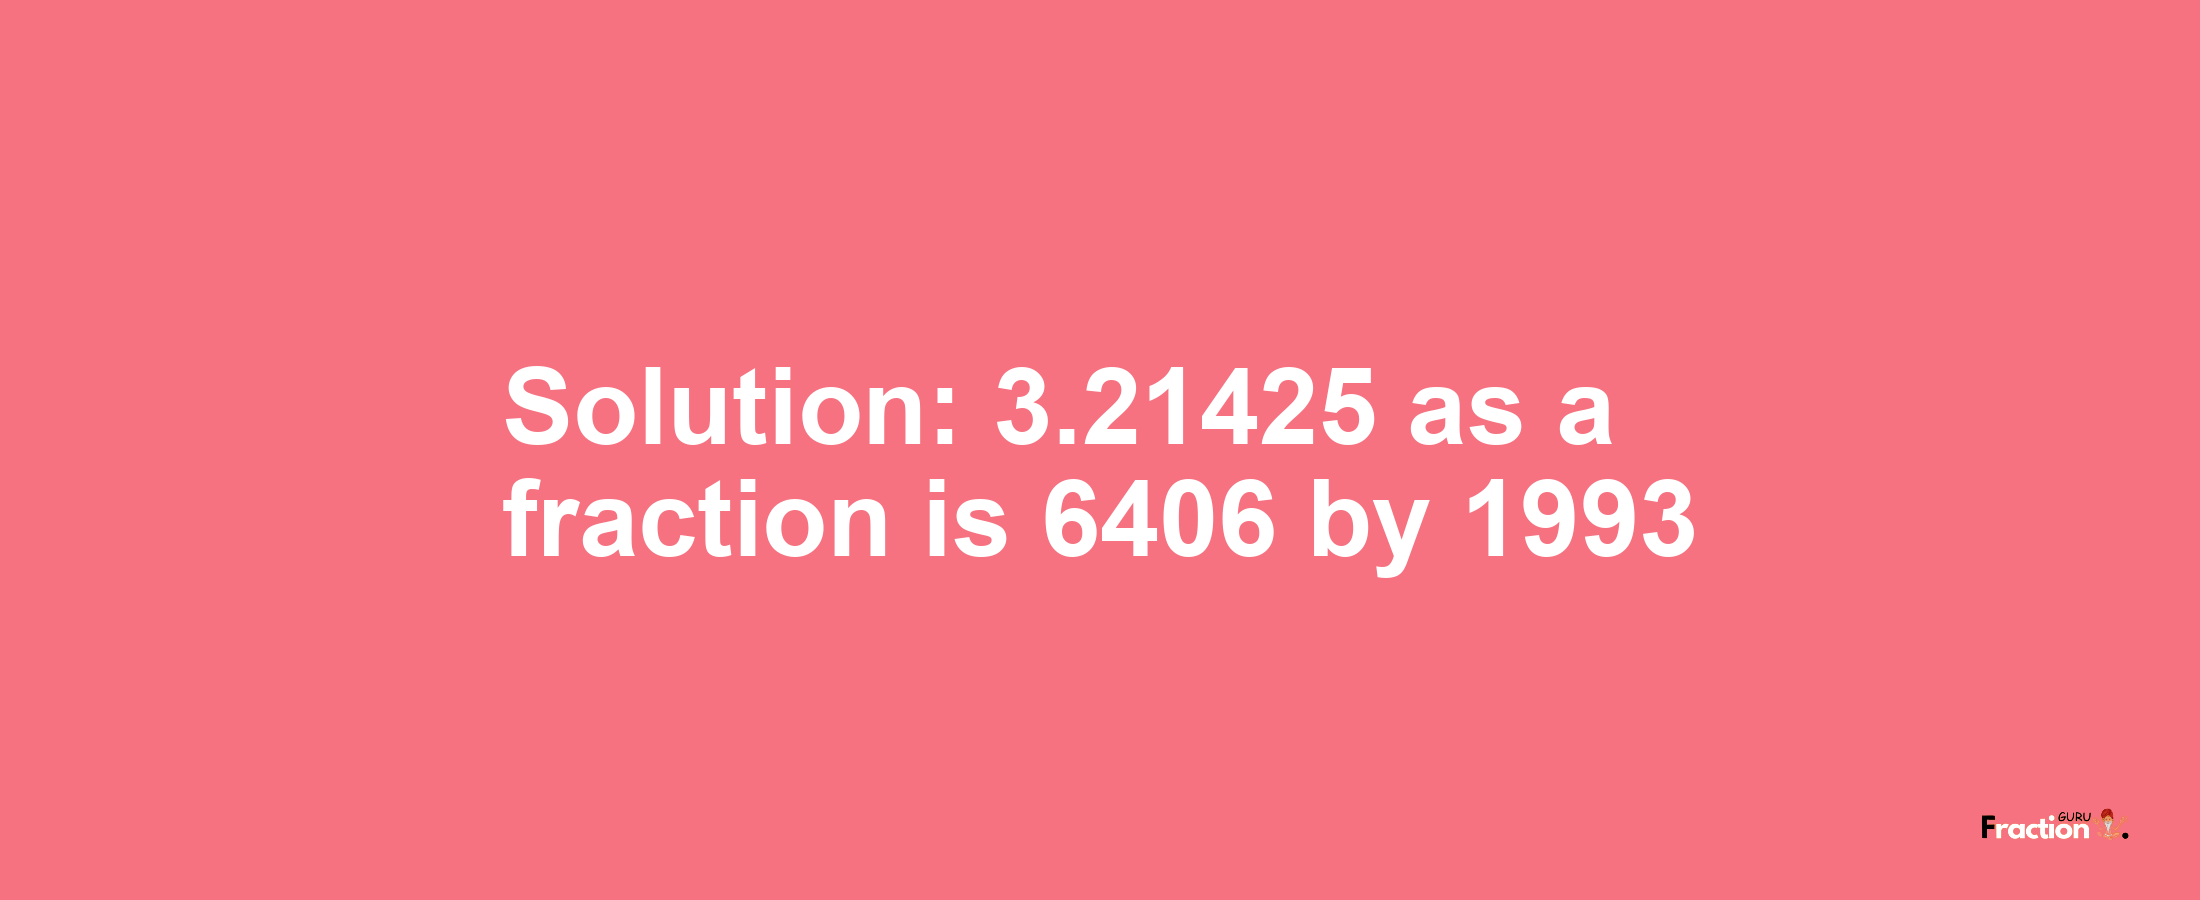 Solution:3.21425 as a fraction is 6406/1993